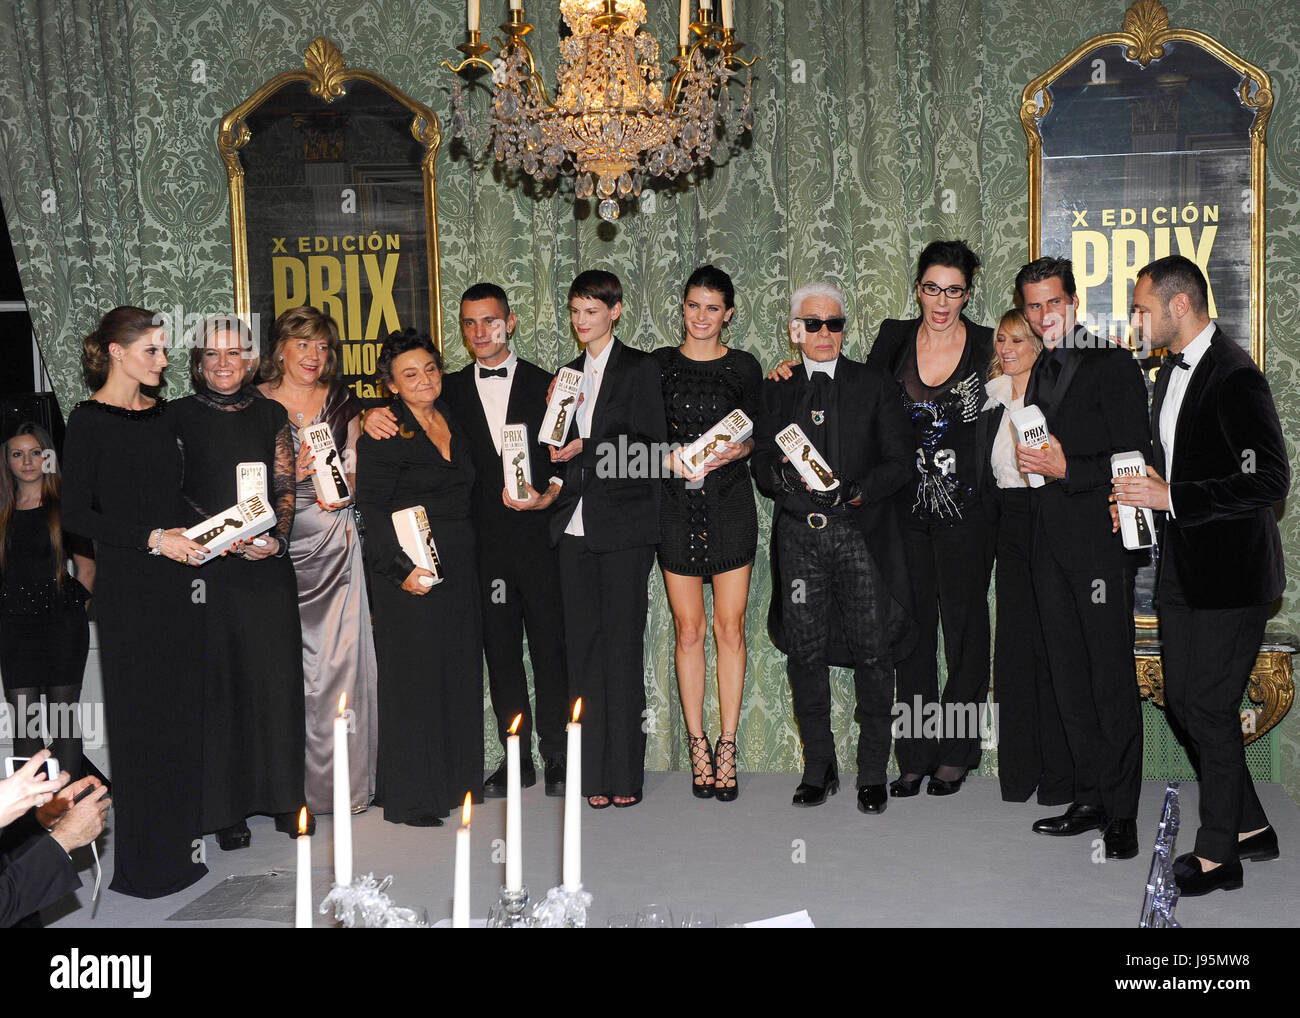 Designer David Delfin with Elena Benarroch , Karl Lagerfeld , Olivia Palermo , Saskia de Brauw and Mark Vanderloo and Youce Nabi during awards Marie Claire 2012  David Delfin, one of the most relevant Spanish designers, died on Saturday of a cancer. This January also died his friend and muse Bimba Bose. Stock Photo